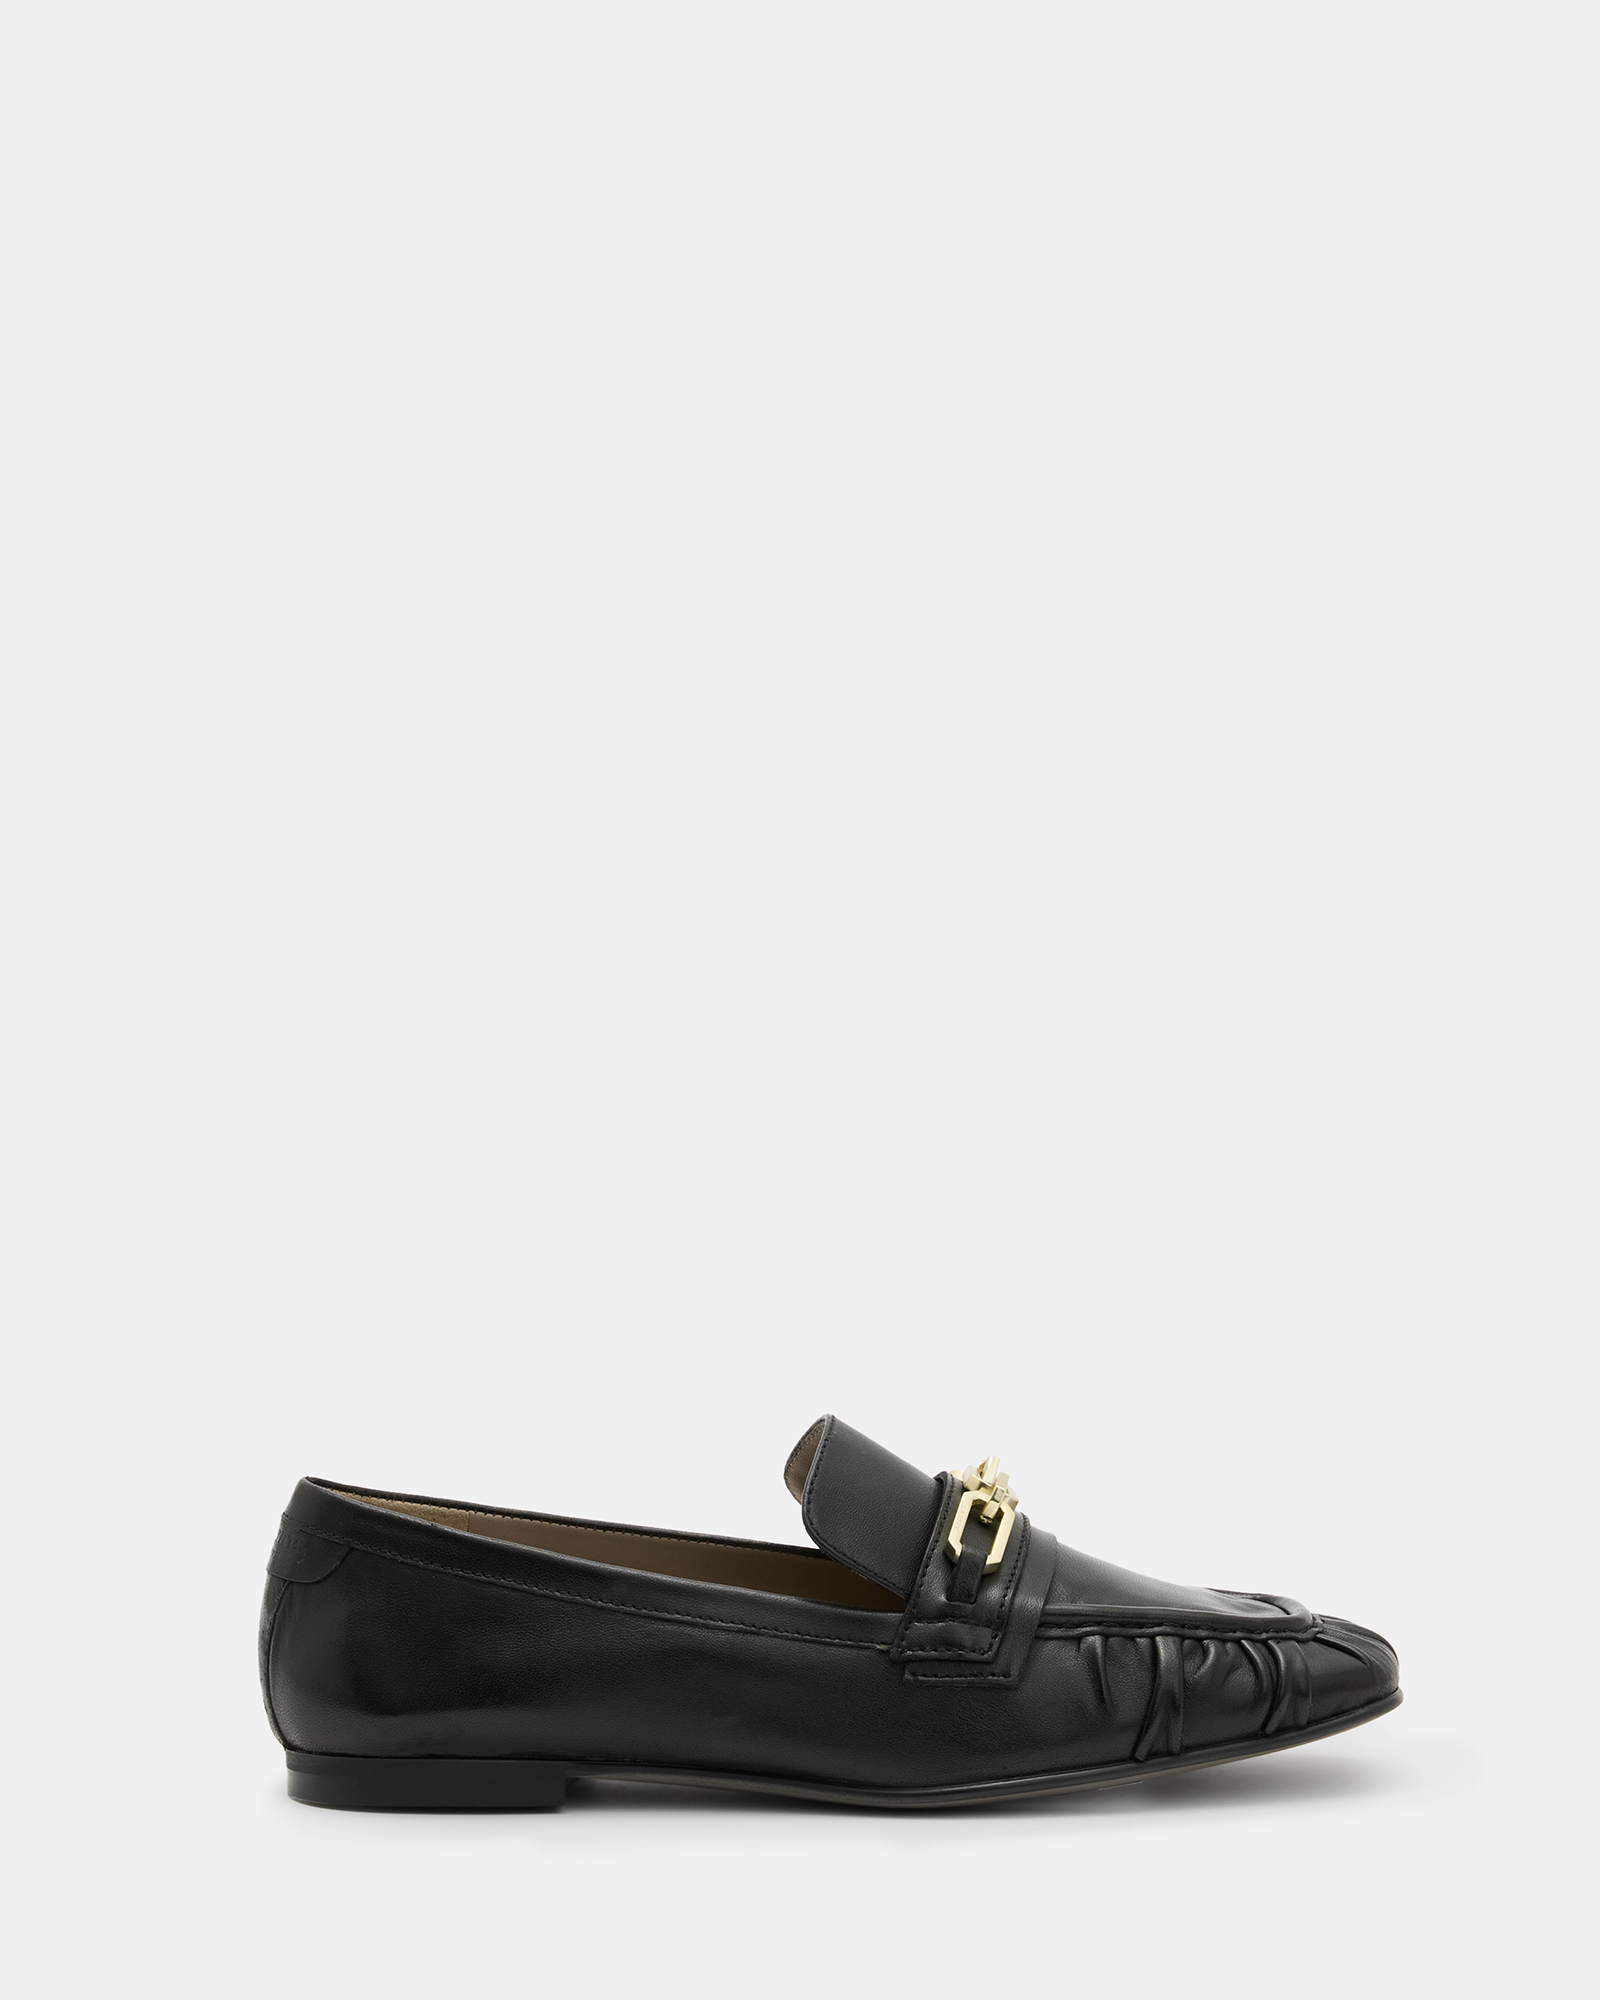 AllSaints Sapphire Leather Chain Loafer Shoes,, Black